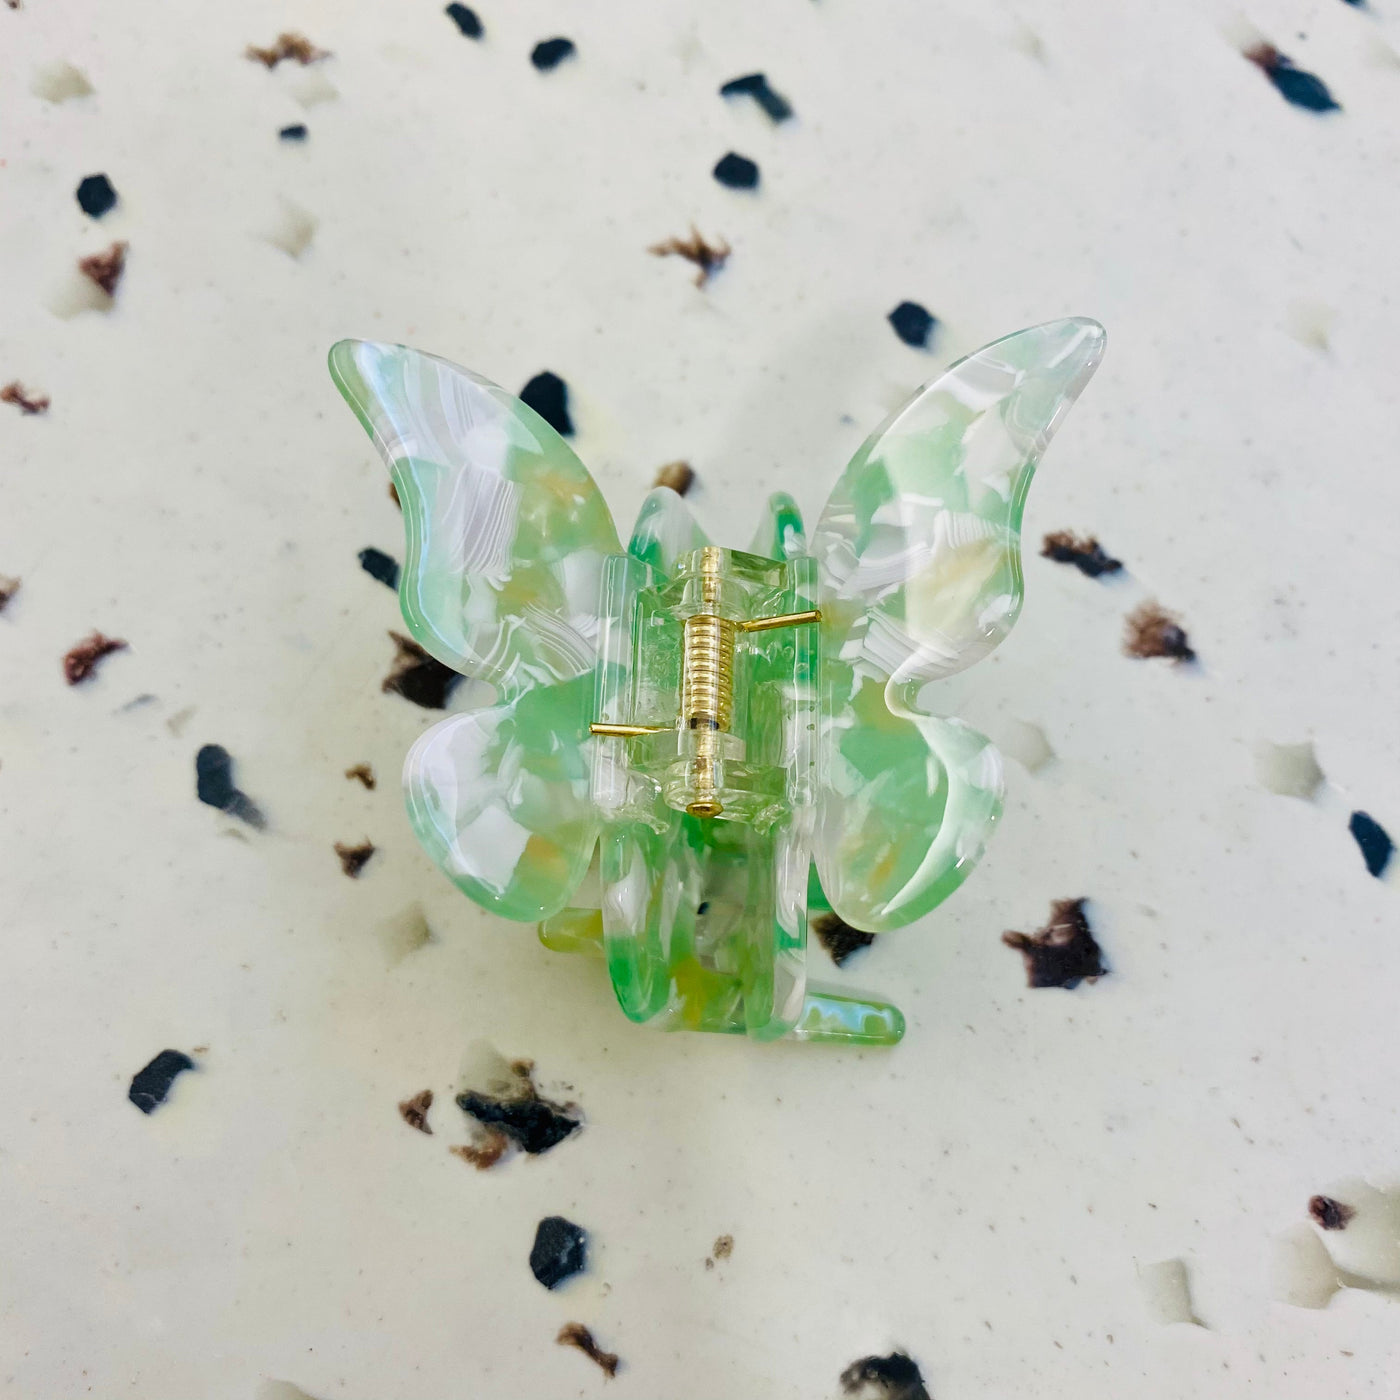 Hair Clips - Butterfly